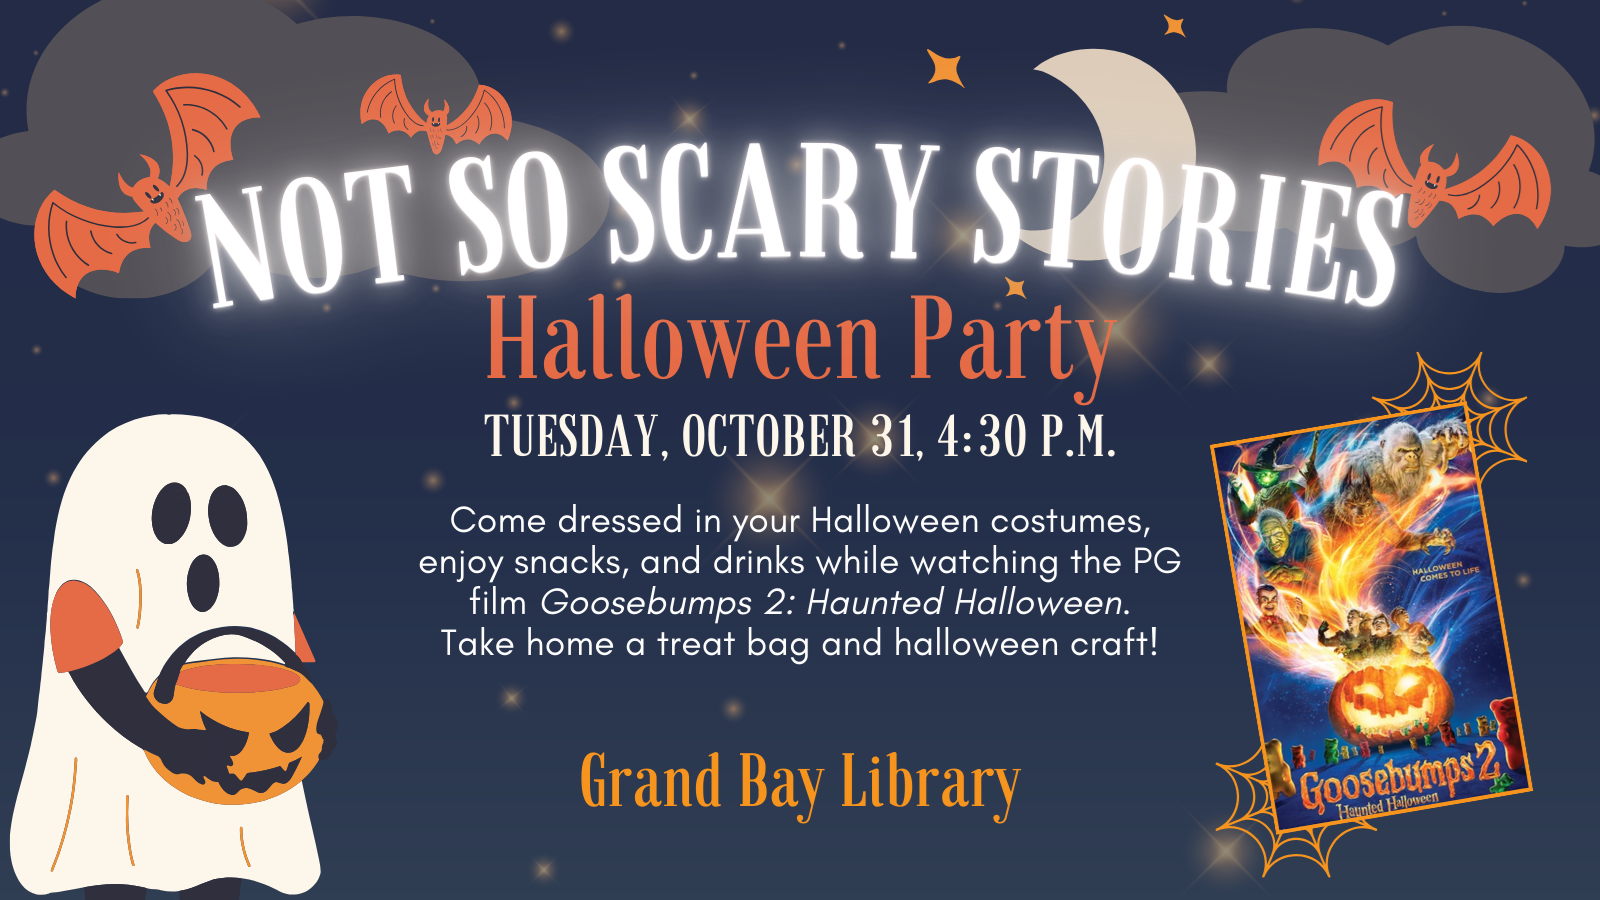 Not So Scary Stories Halloween Party